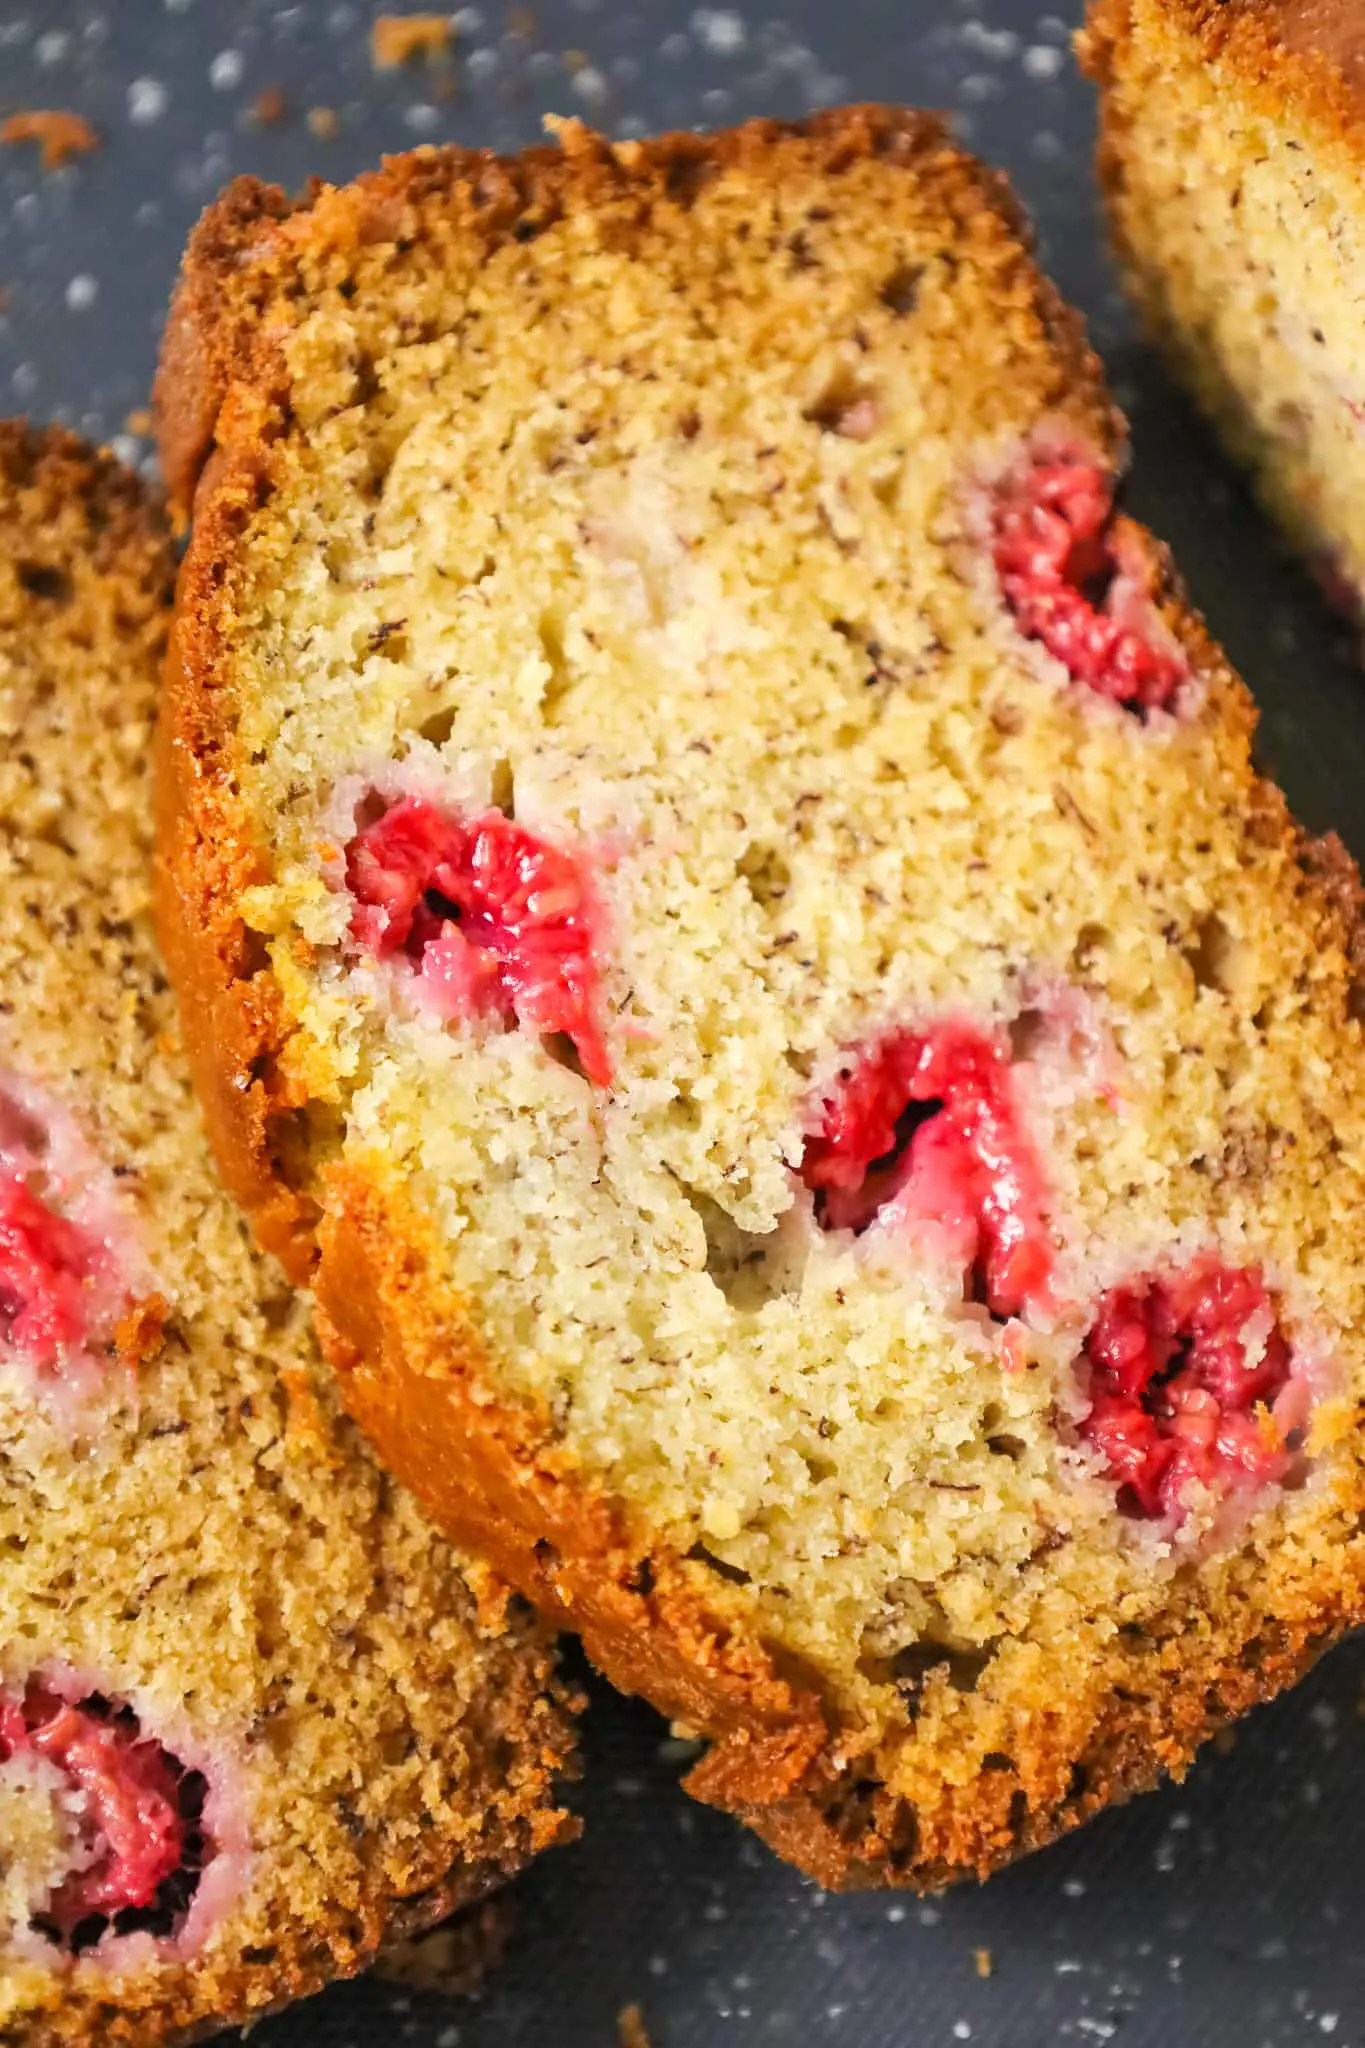 Raspberry Banana Bread is a tasty treat made with ripe bananas and loaded with fresh raspberries.